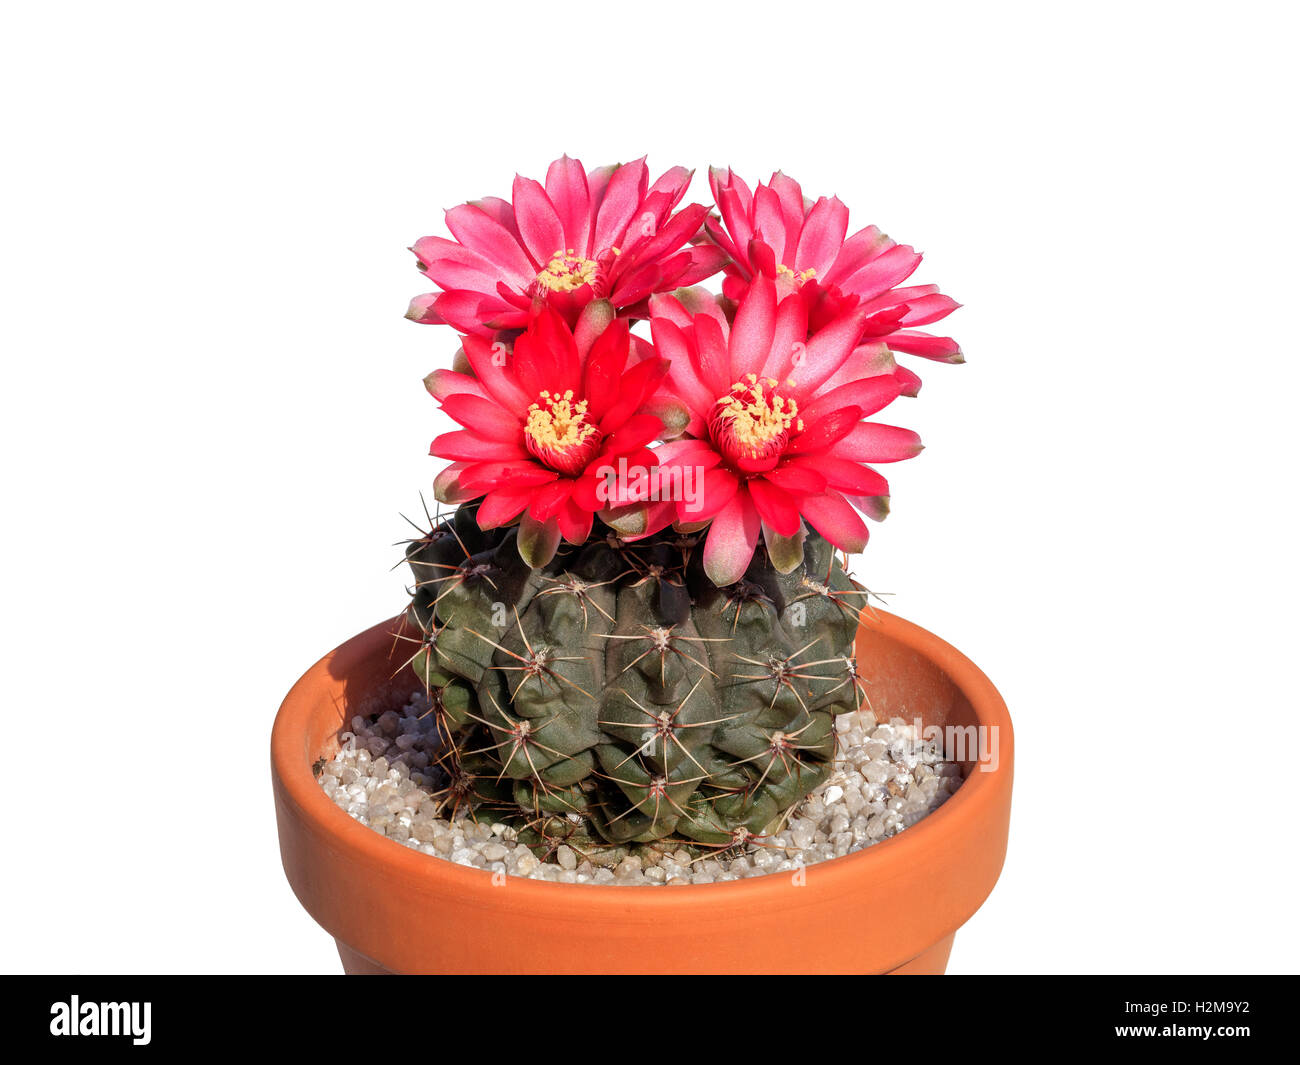 Cactus Gymnocalycium baldianum with four red blossoms in pot, isolated Stock Photo